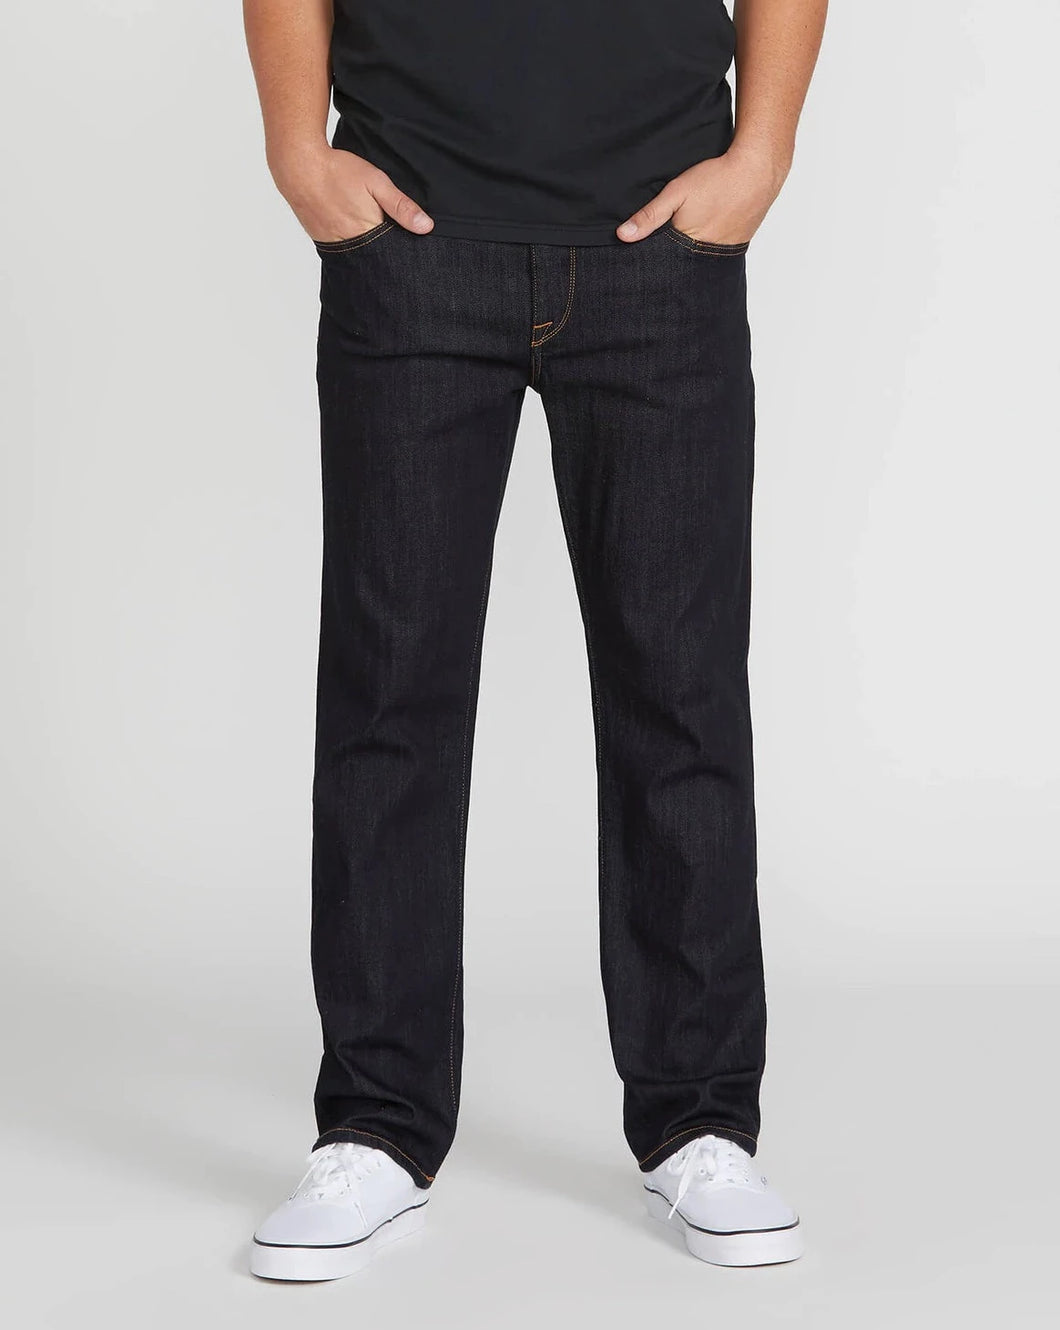 SOLVER MODERN FIT JEANS - RINSE